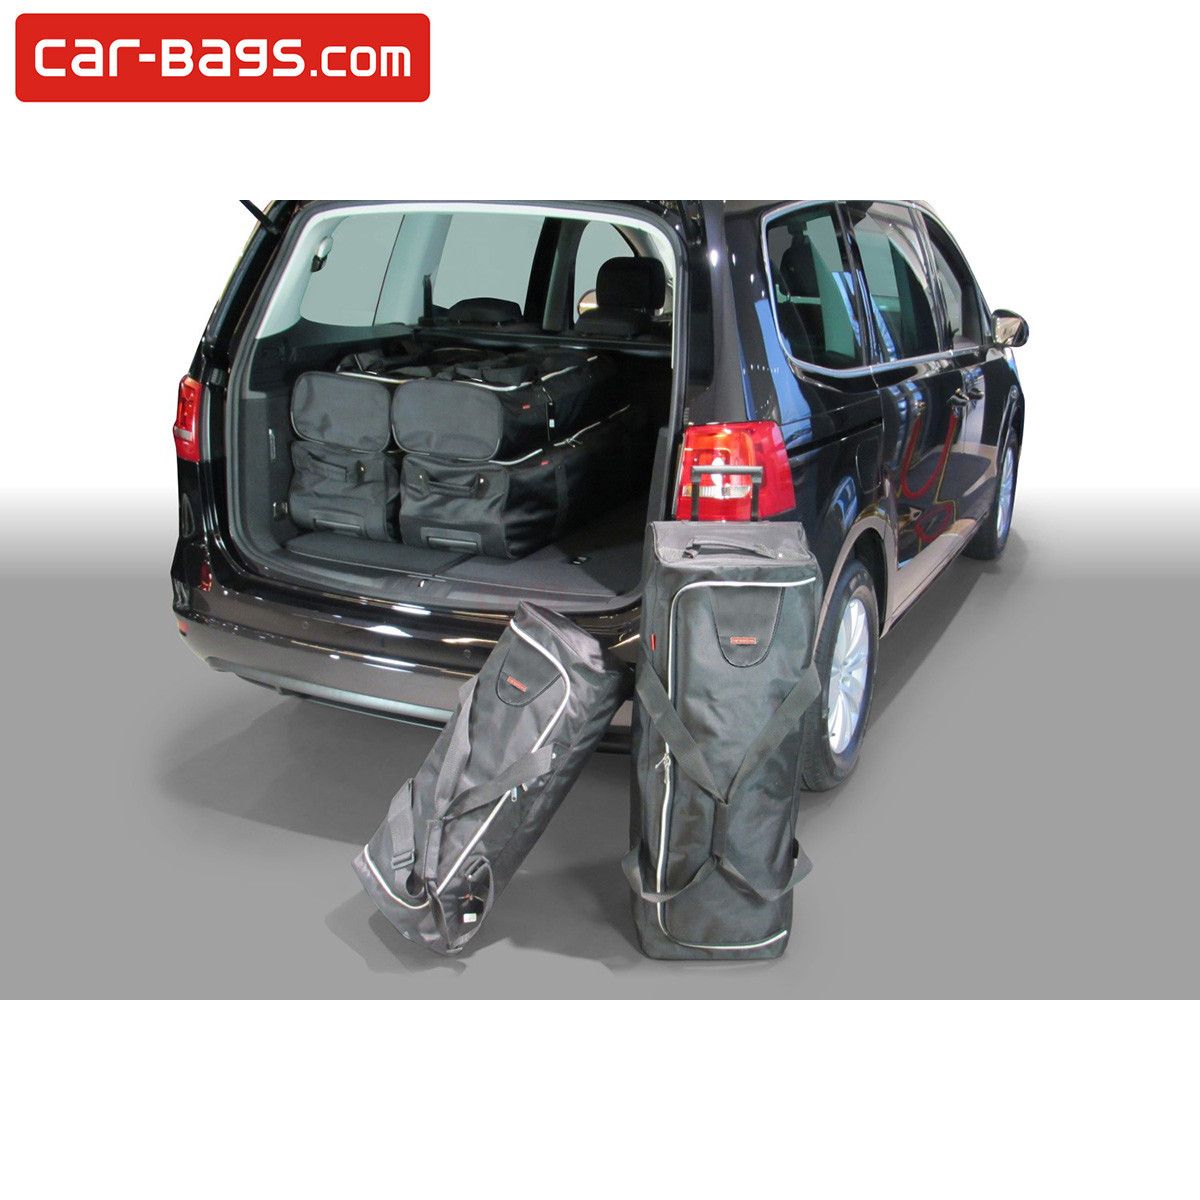 Travel bags fits Seat Alhambra II (7N) tailor made (6 bags)